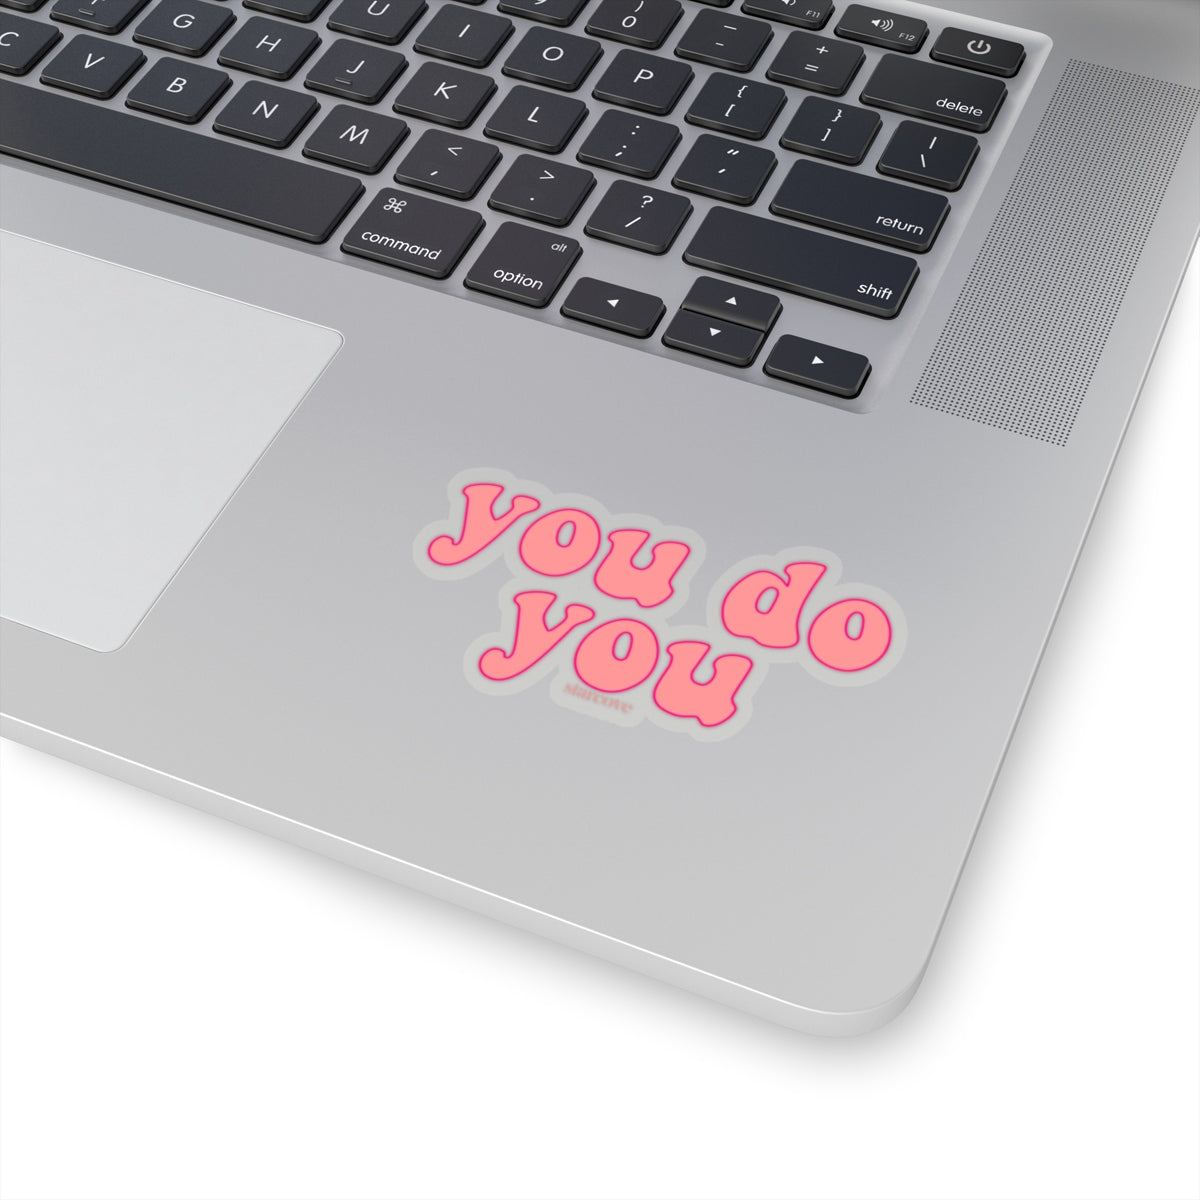 You Do You Stickers Laptop Vinyl Cute Waterproof for Waterbottle Tumbler Car Bumper Aesthetic Label Wall Decal Starcove Fashion